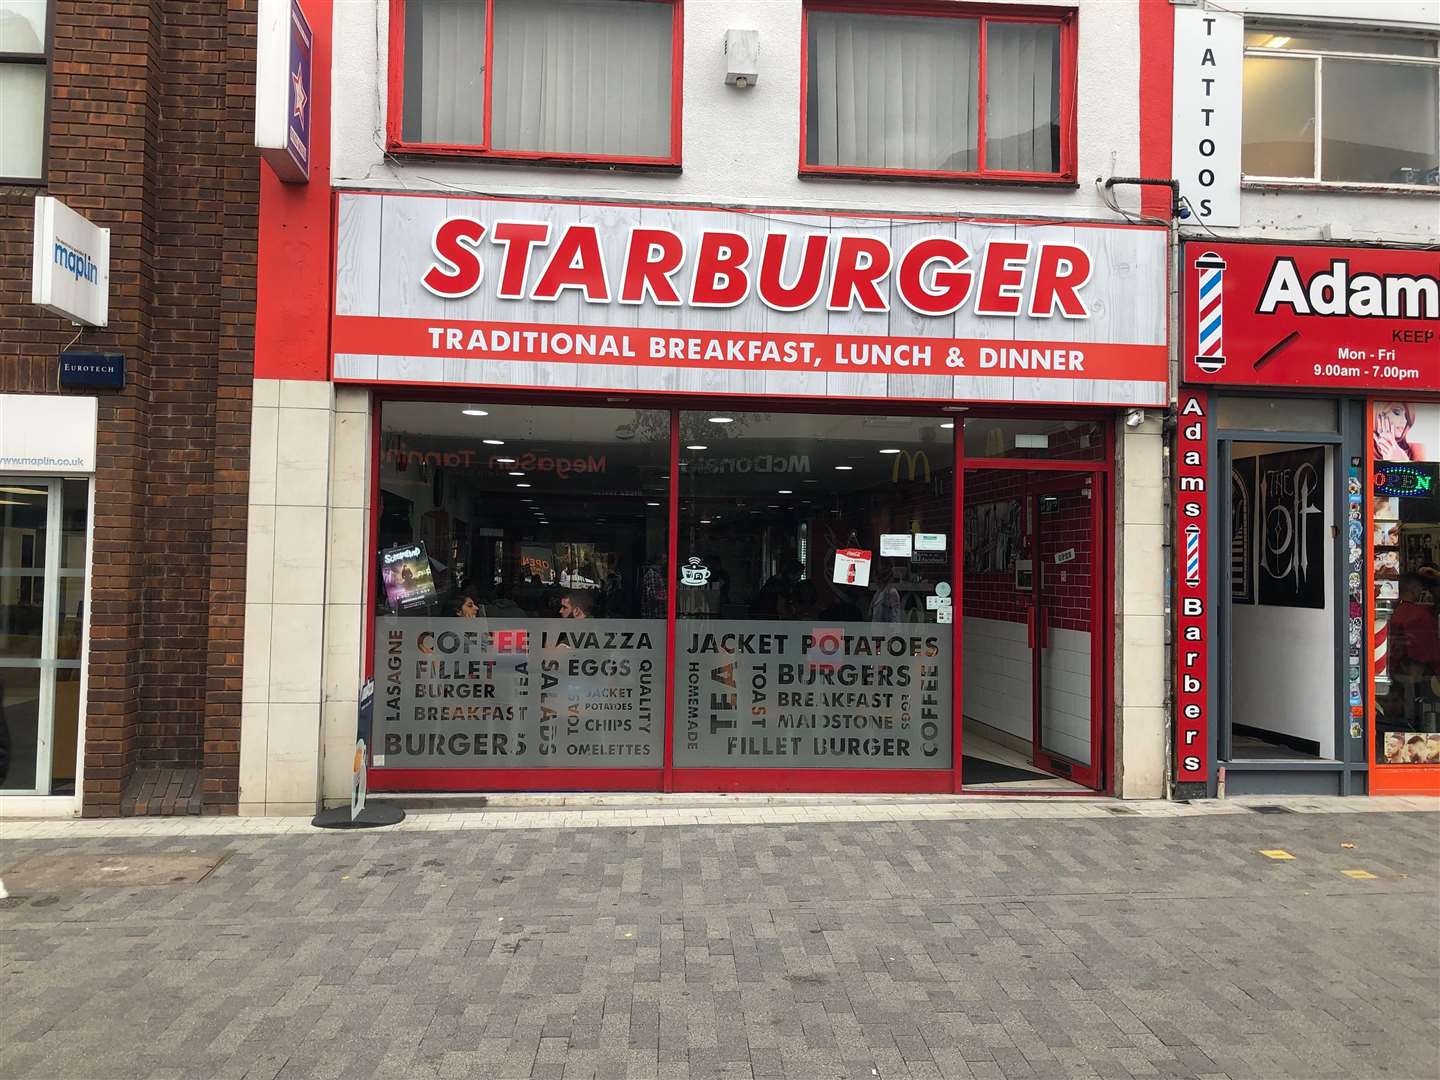 Starburger, such as this one in Maidstone, is not just all about its burgers